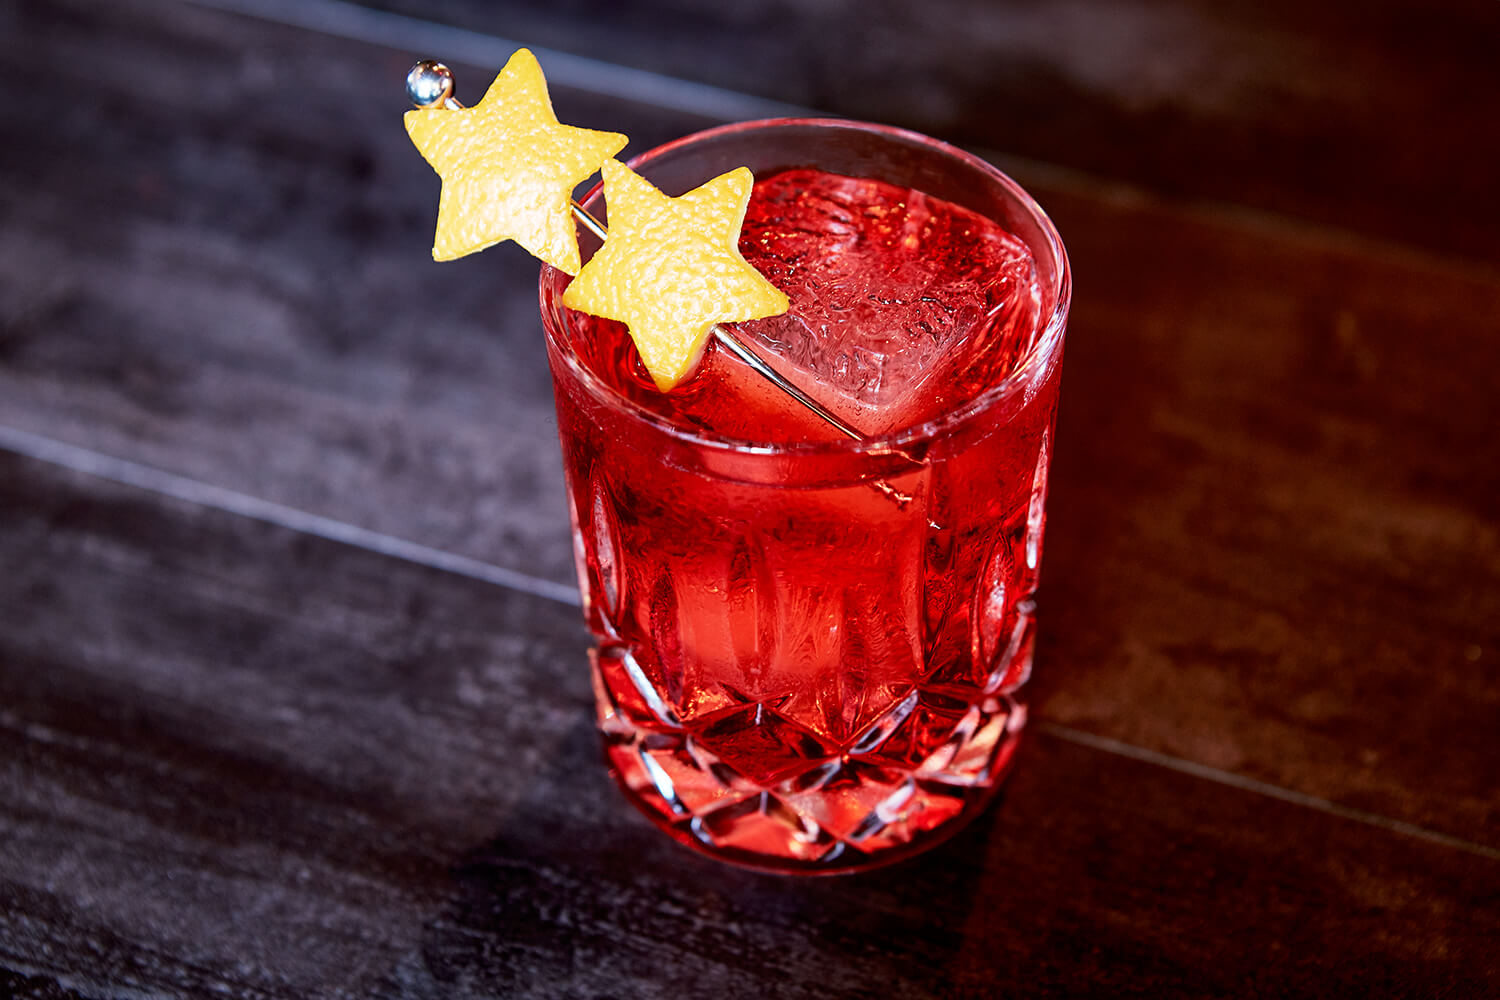 The Red Planet Negroni from The NoMad - 9 #negroniweek riffs